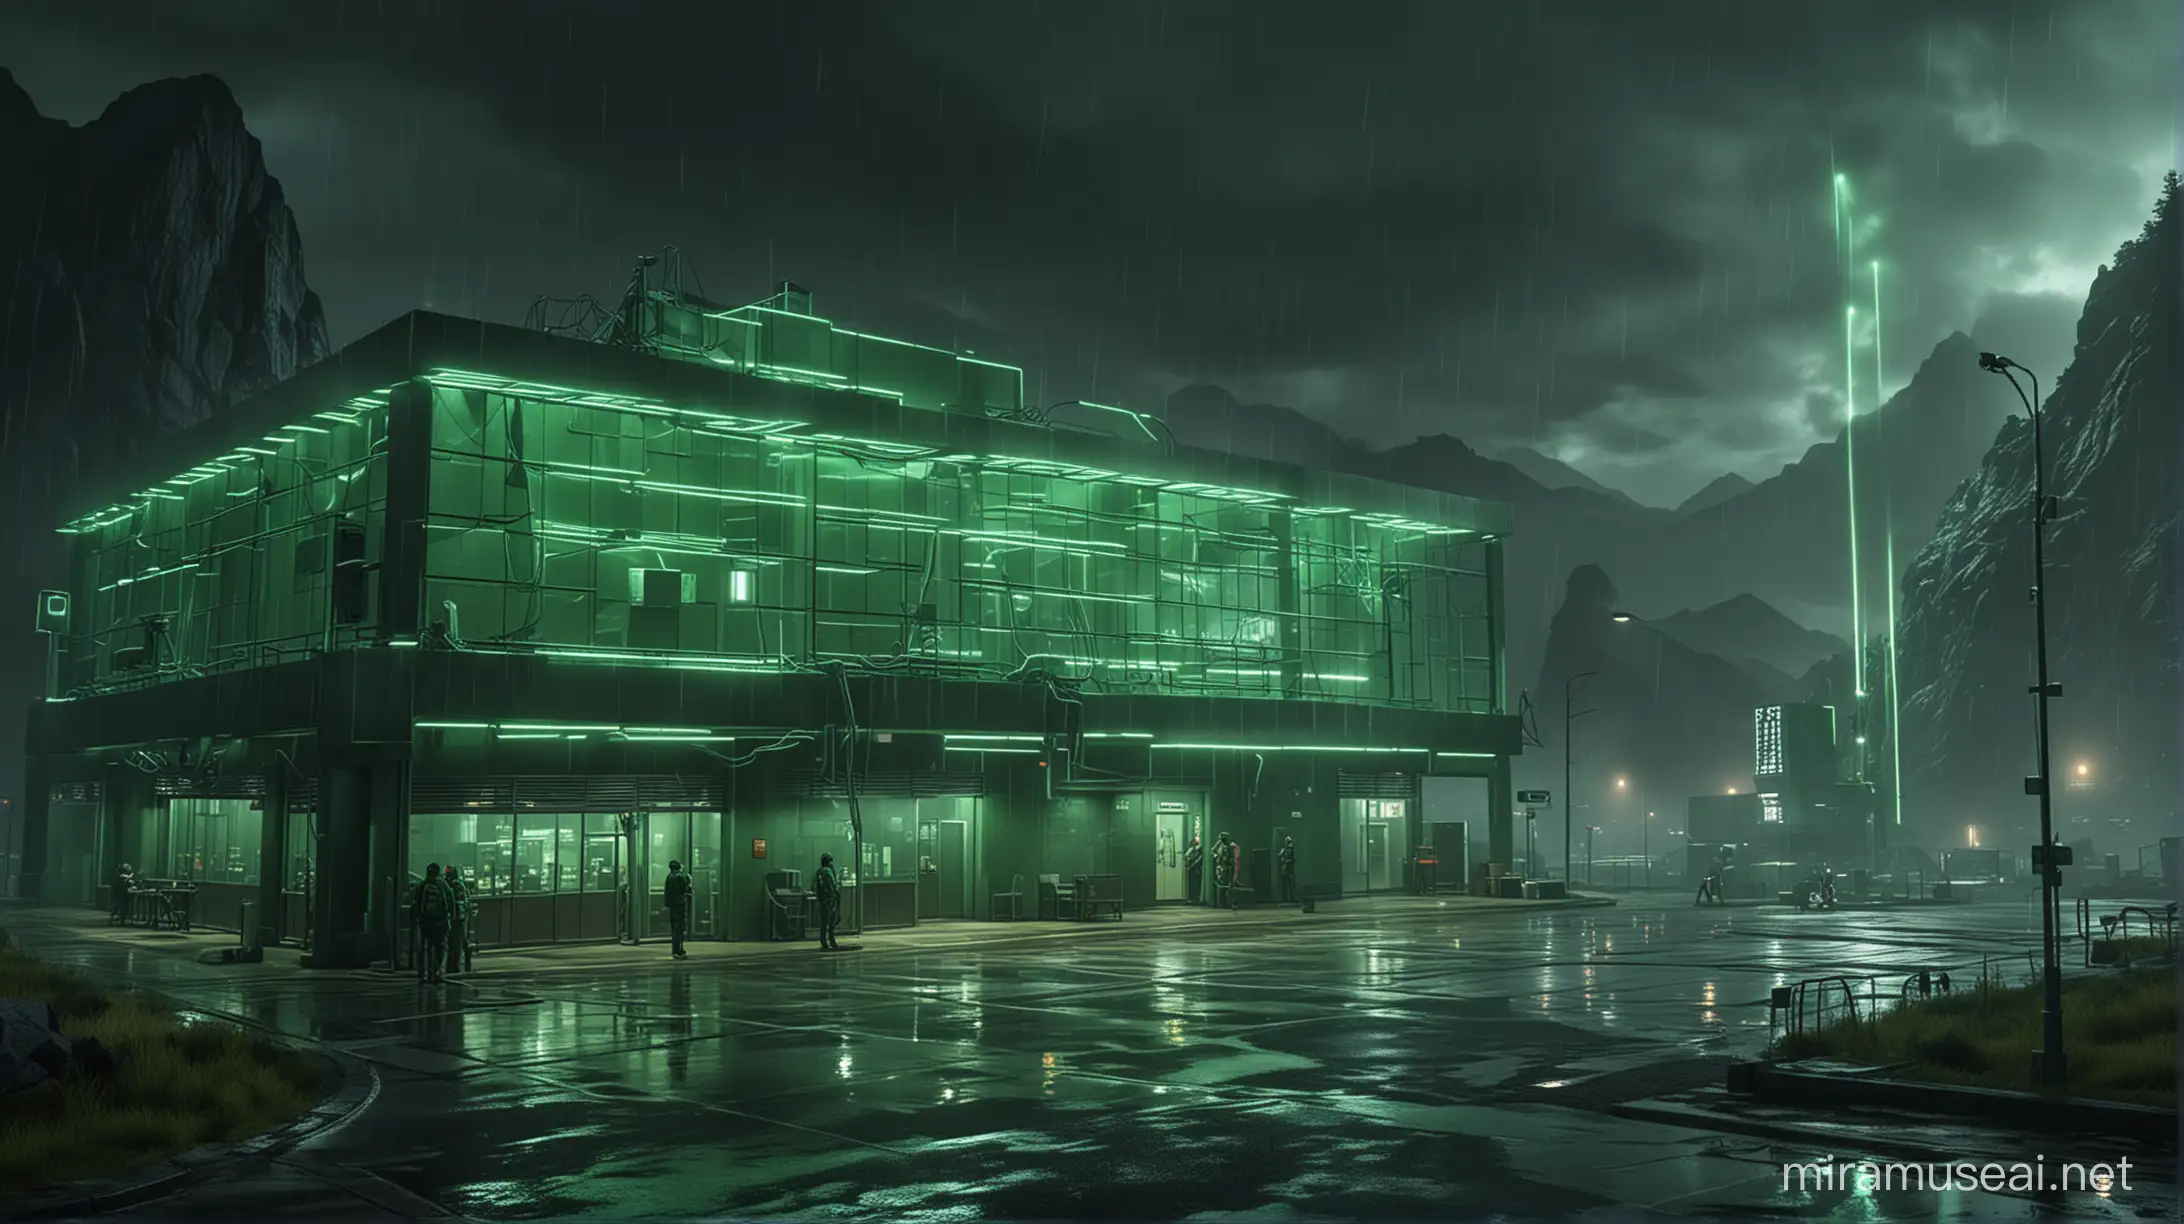 Realistic Research Center in Rainy Weather with Bright Green Neon Lights